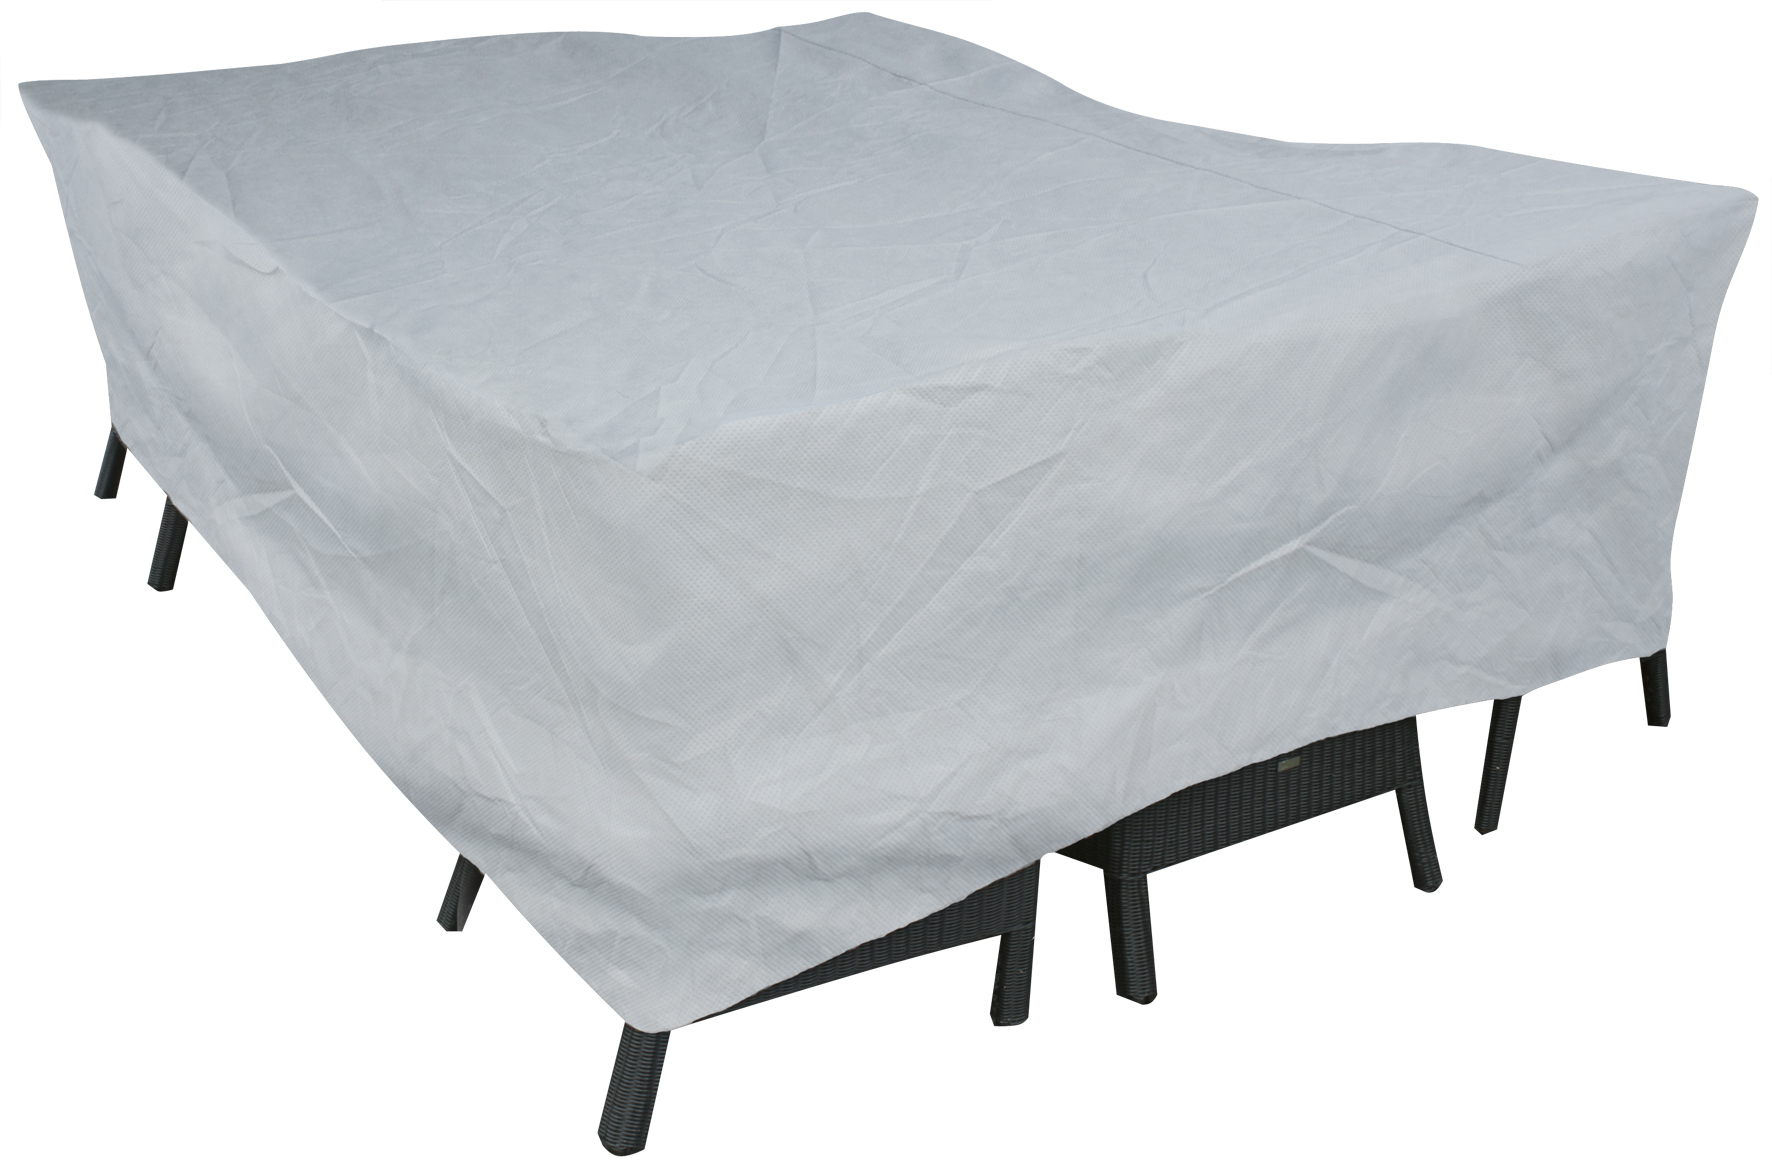 Weather cover for rectangular furniture set 165 x 150 H: 100 cm